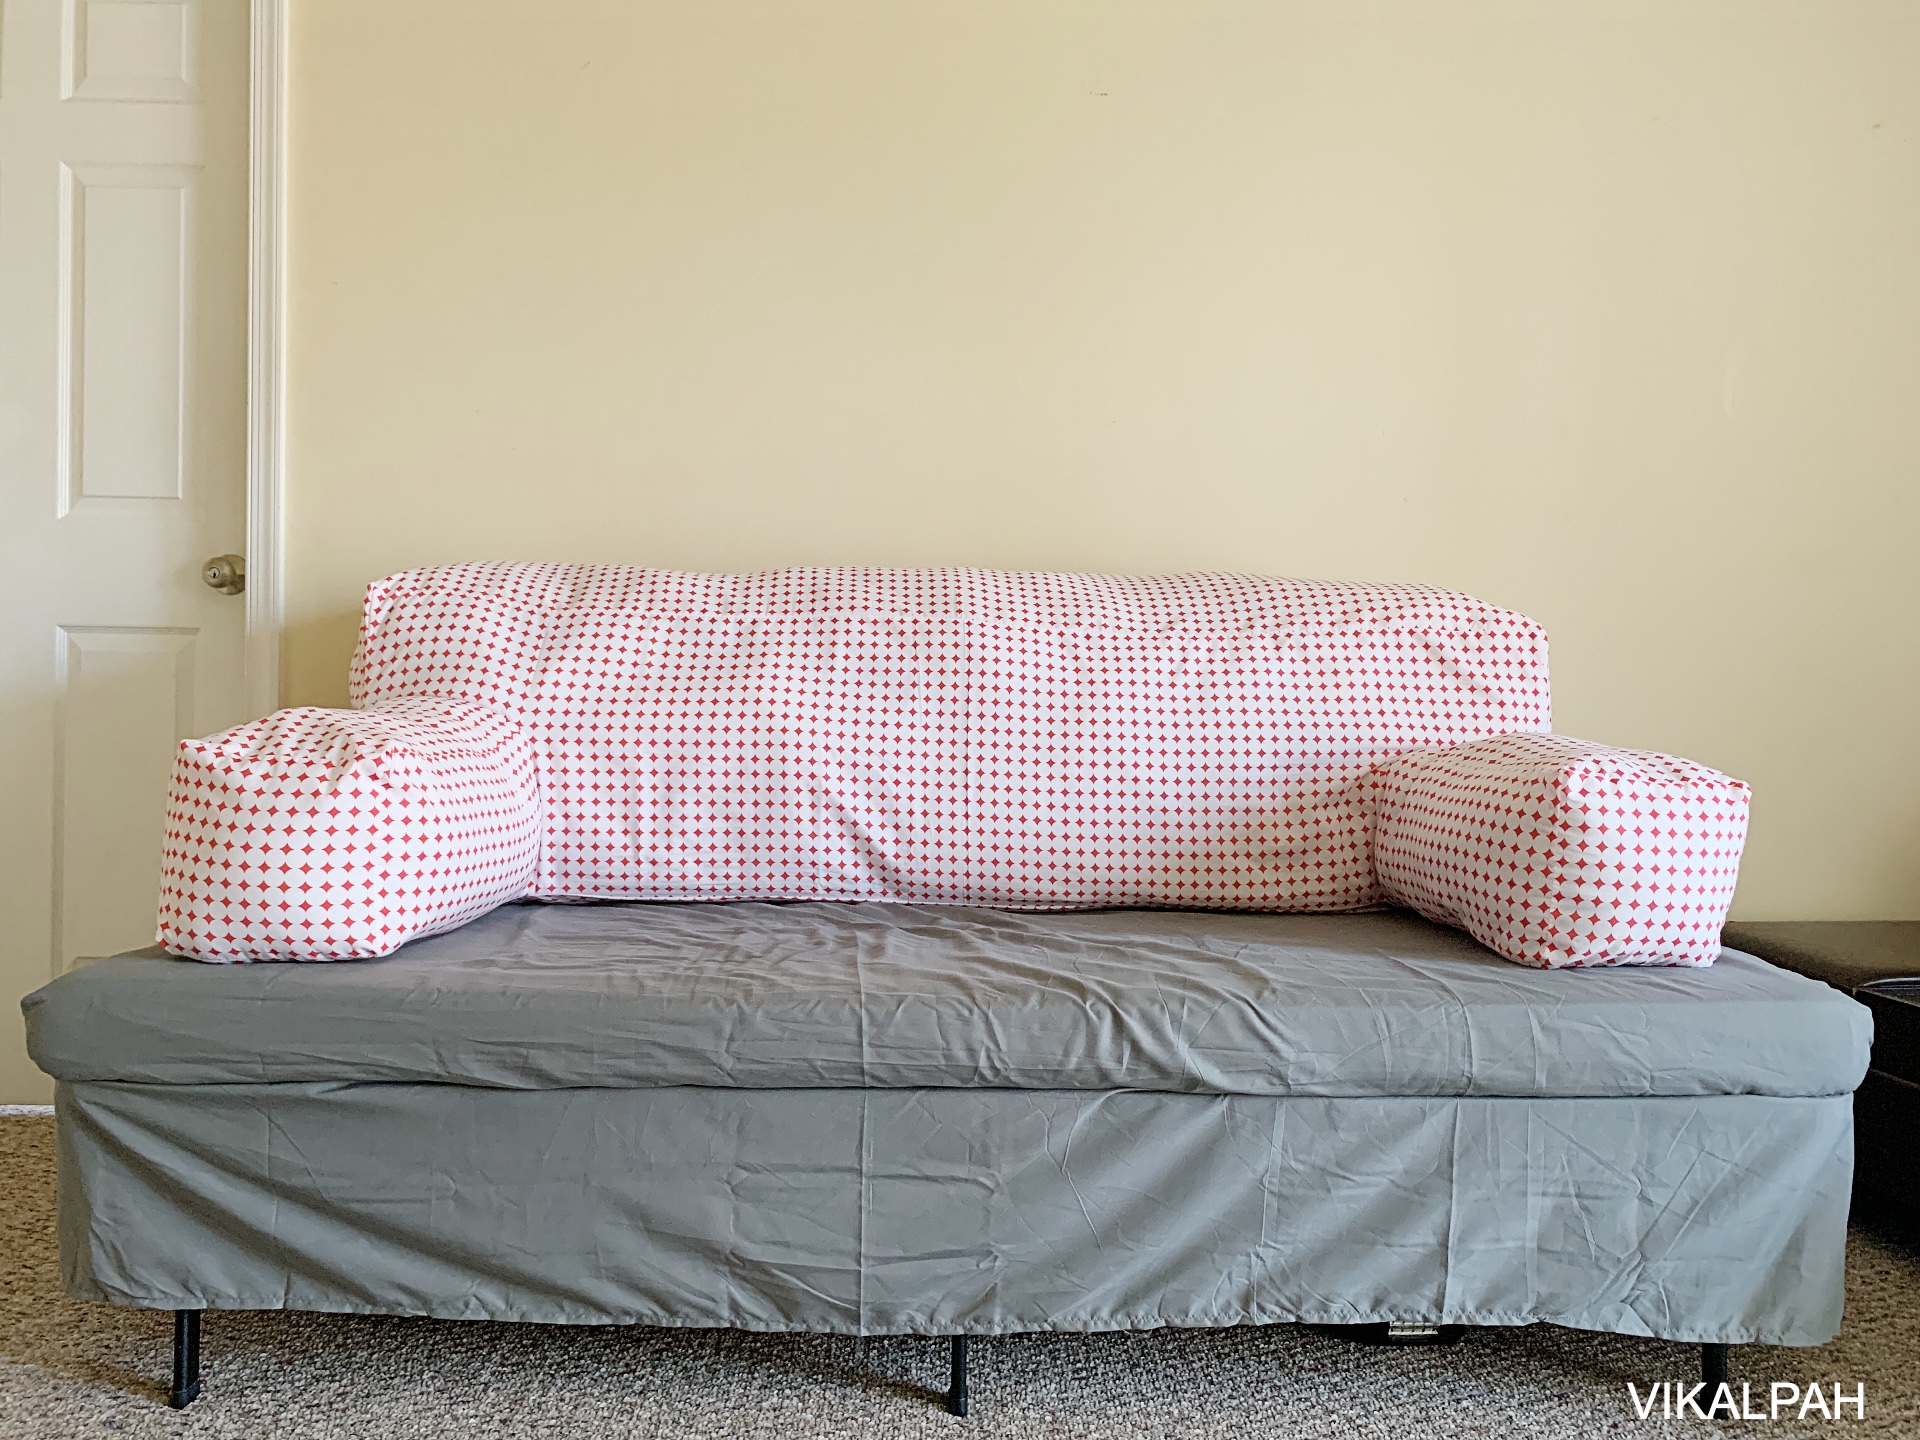 How To Convert A Twin Bed Into Couch, How To Convert A Daybed Into Couch